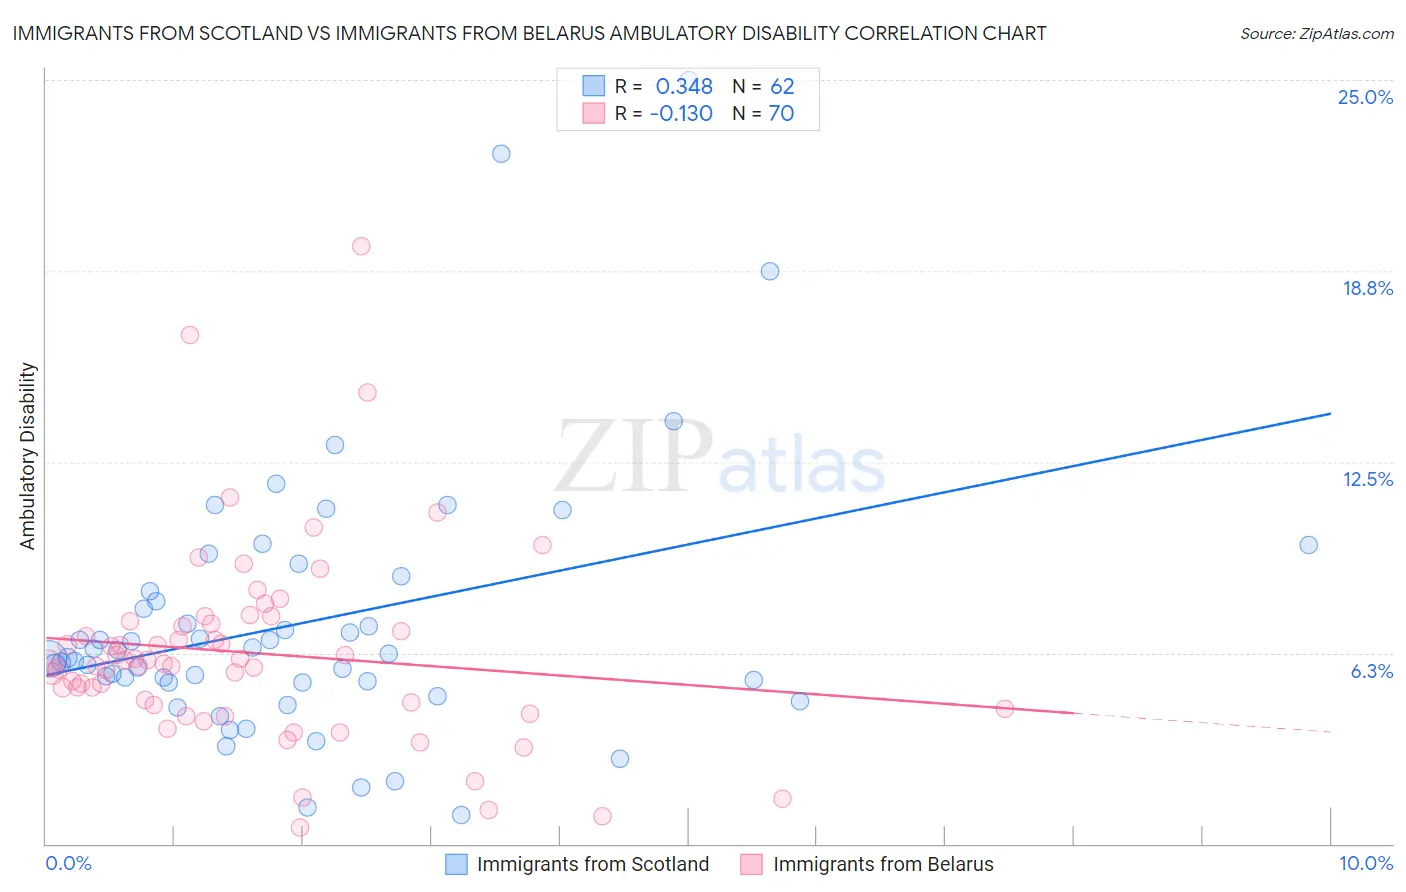 Immigrants from Scotland vs Immigrants from Belarus Ambulatory Disability